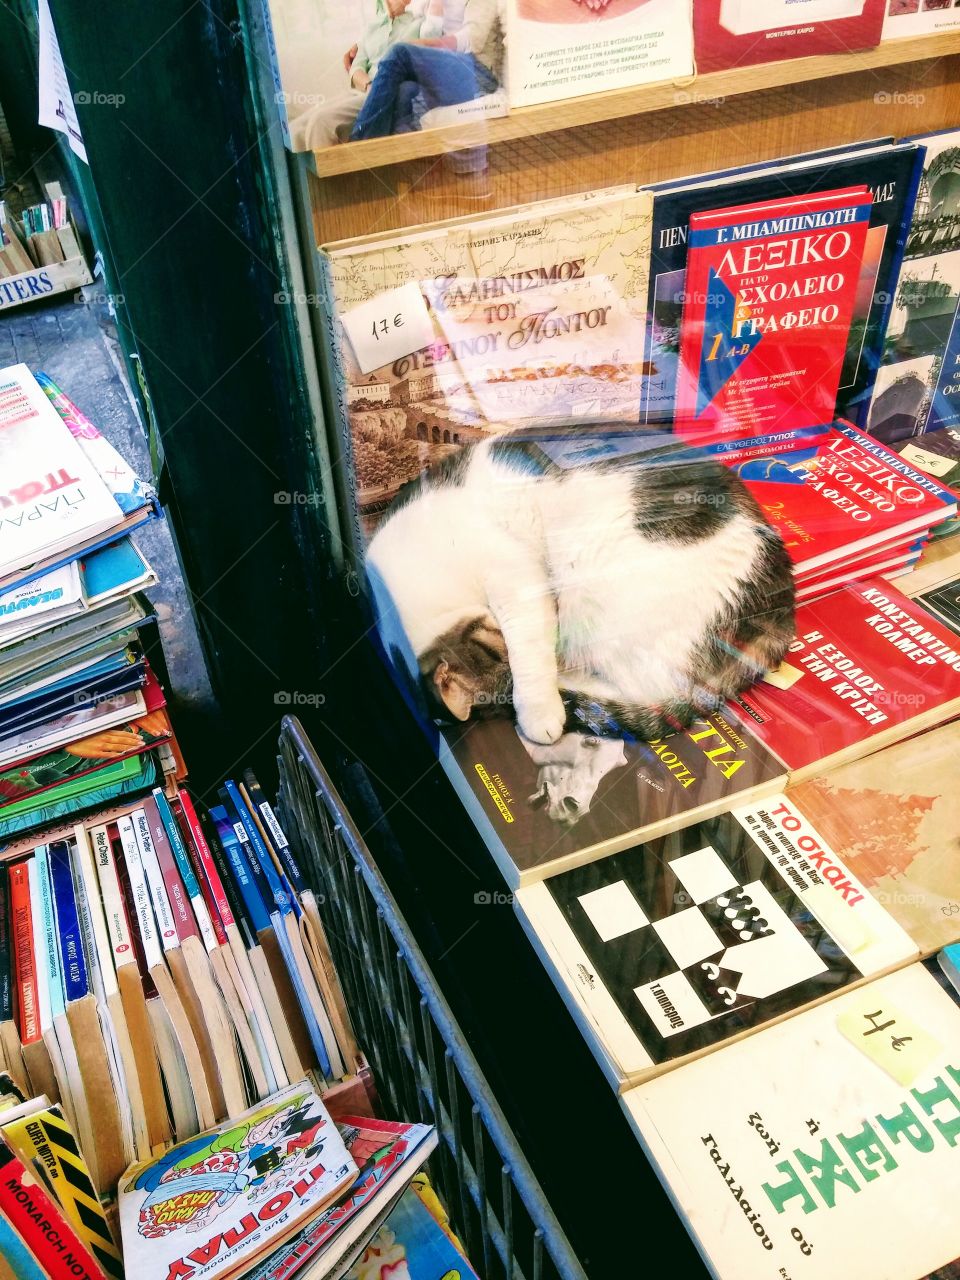 cat and books